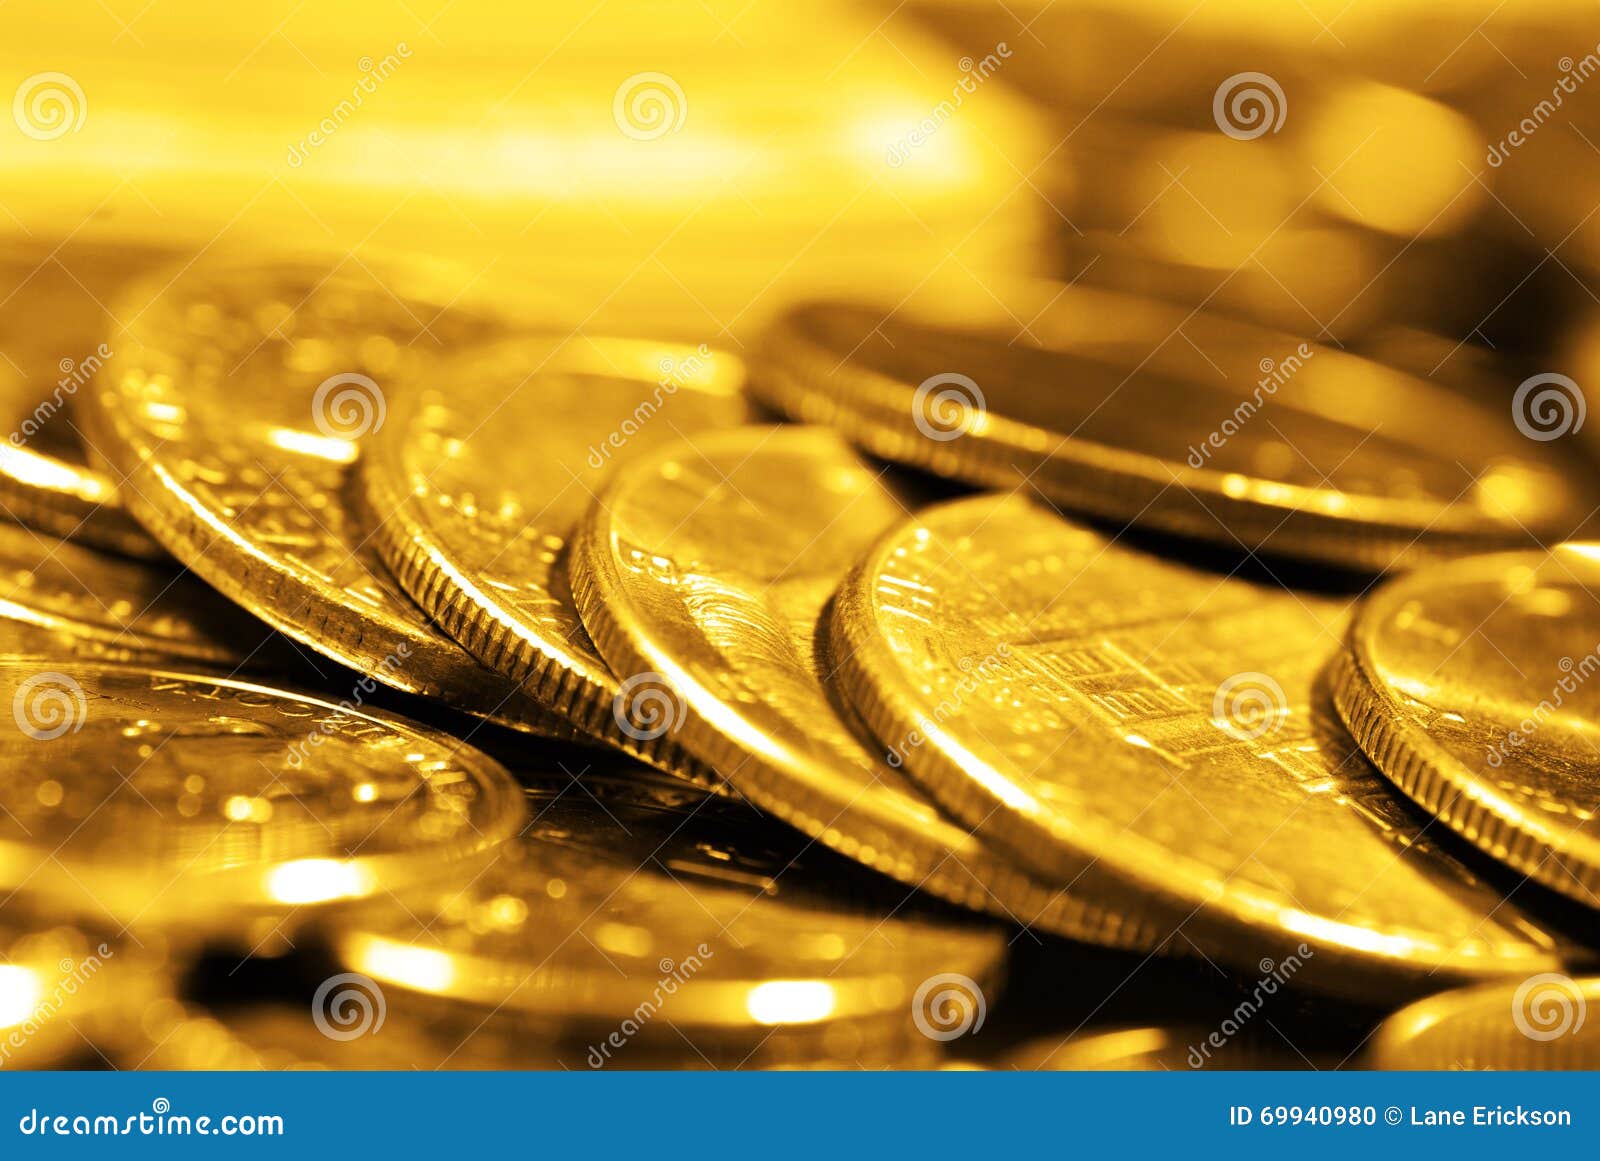 pile of gold coins representing wealth riches